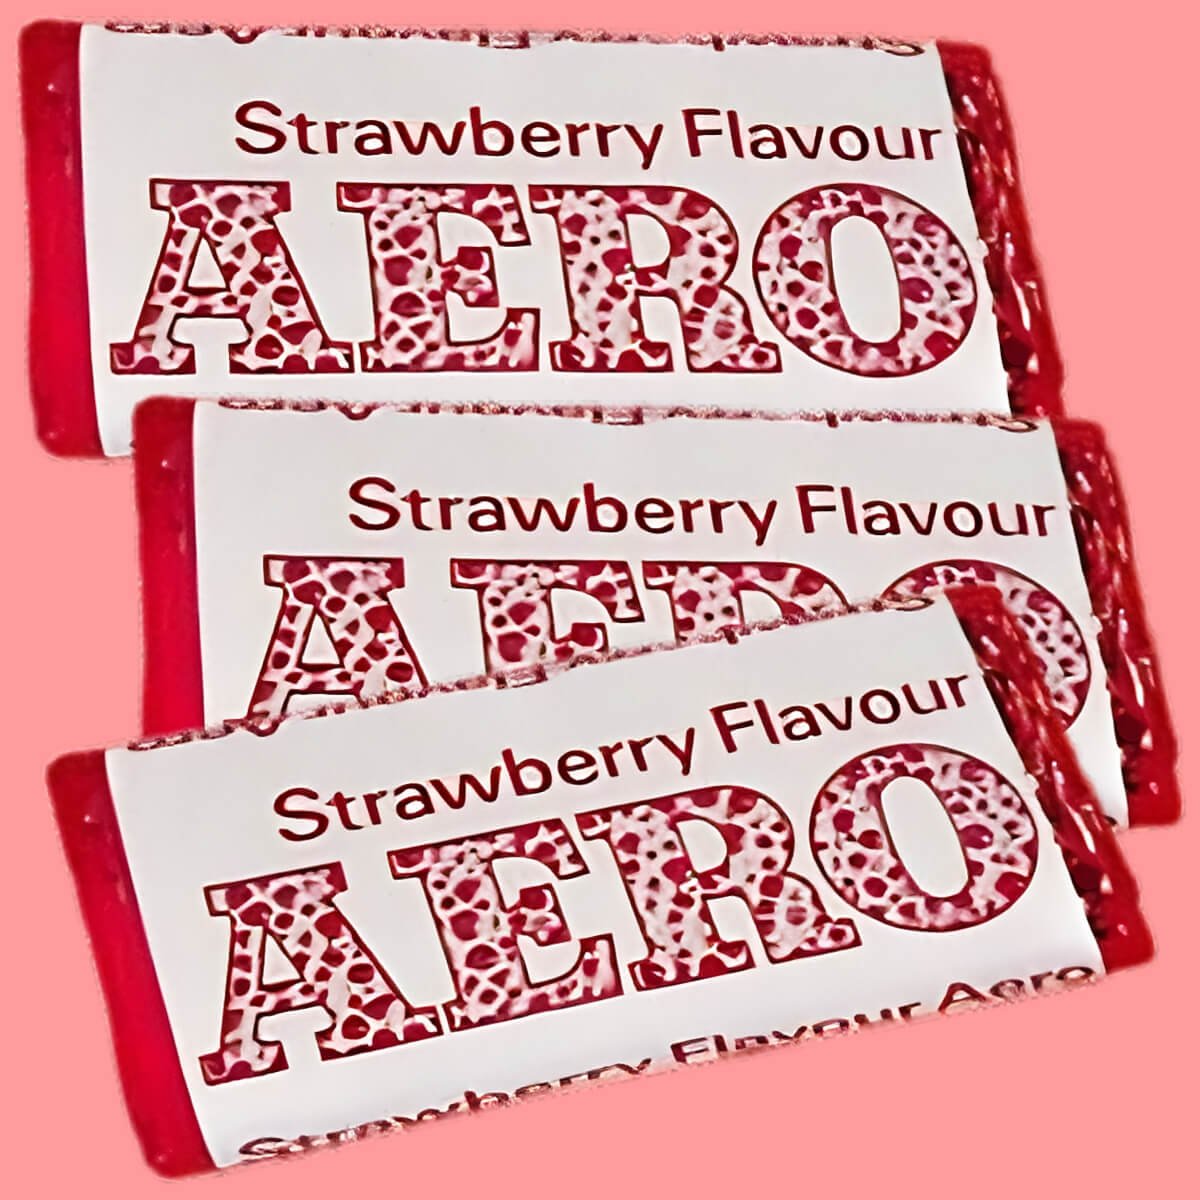 Three Strawberry Flavour Aero chocolate bars from 1970. Red and white wrappers with pink background